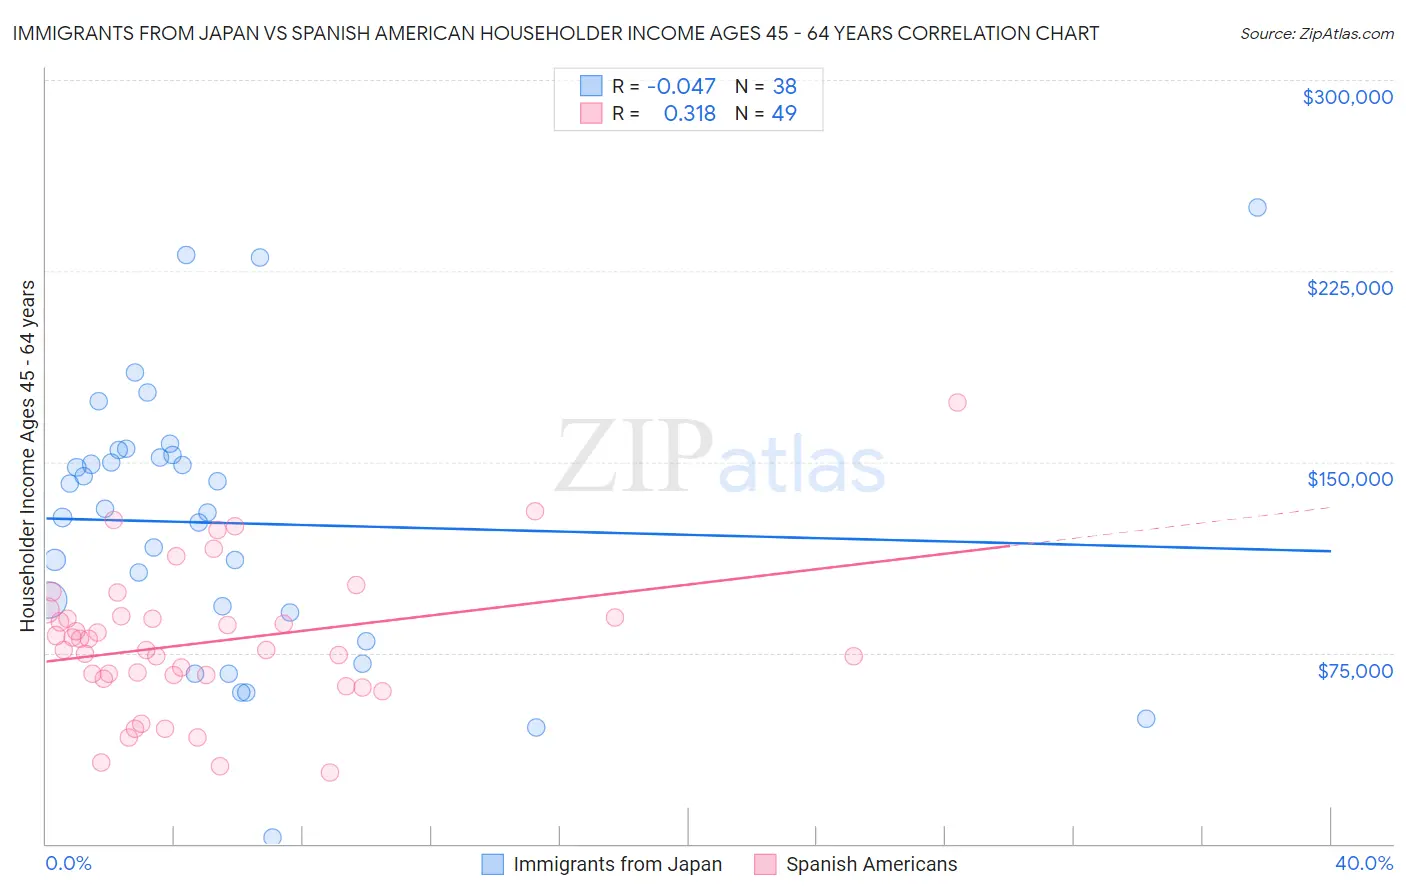 Immigrants from Japan vs Spanish American Householder Income Ages 45 - 64 years